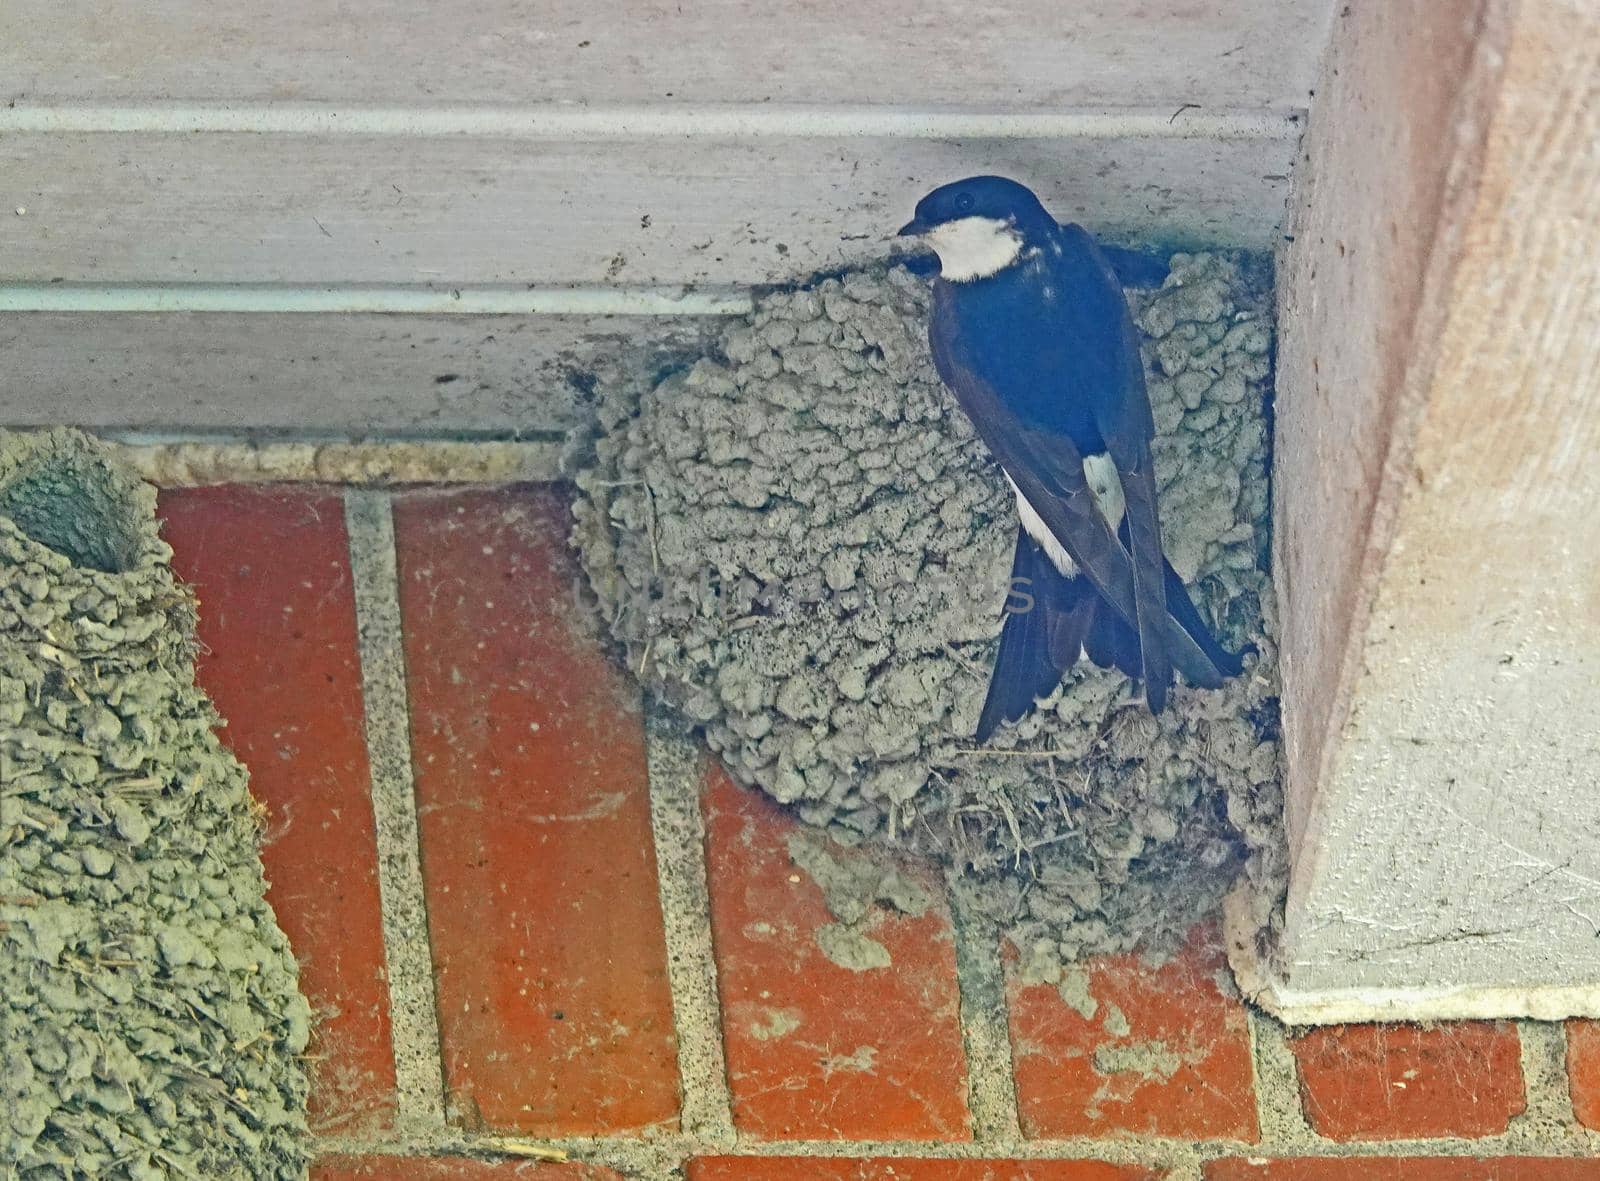 Common house martin (Delichon urbicum) bringing food to its youngsters. It's hanging on a nest.  The nests are constructed by both sexes with mud pellets collected in their beaks